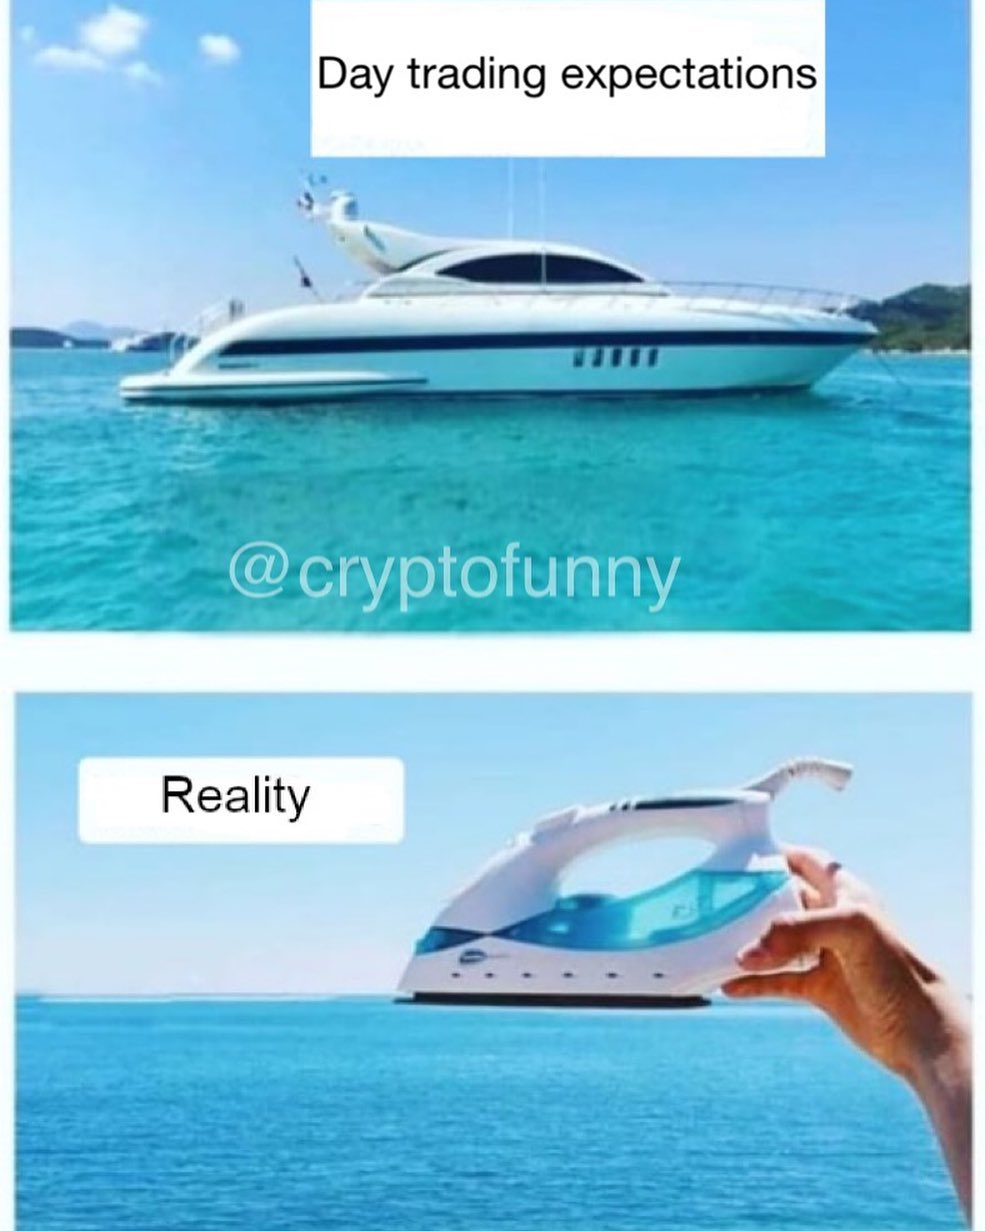 Day trading expectations.  Reality.